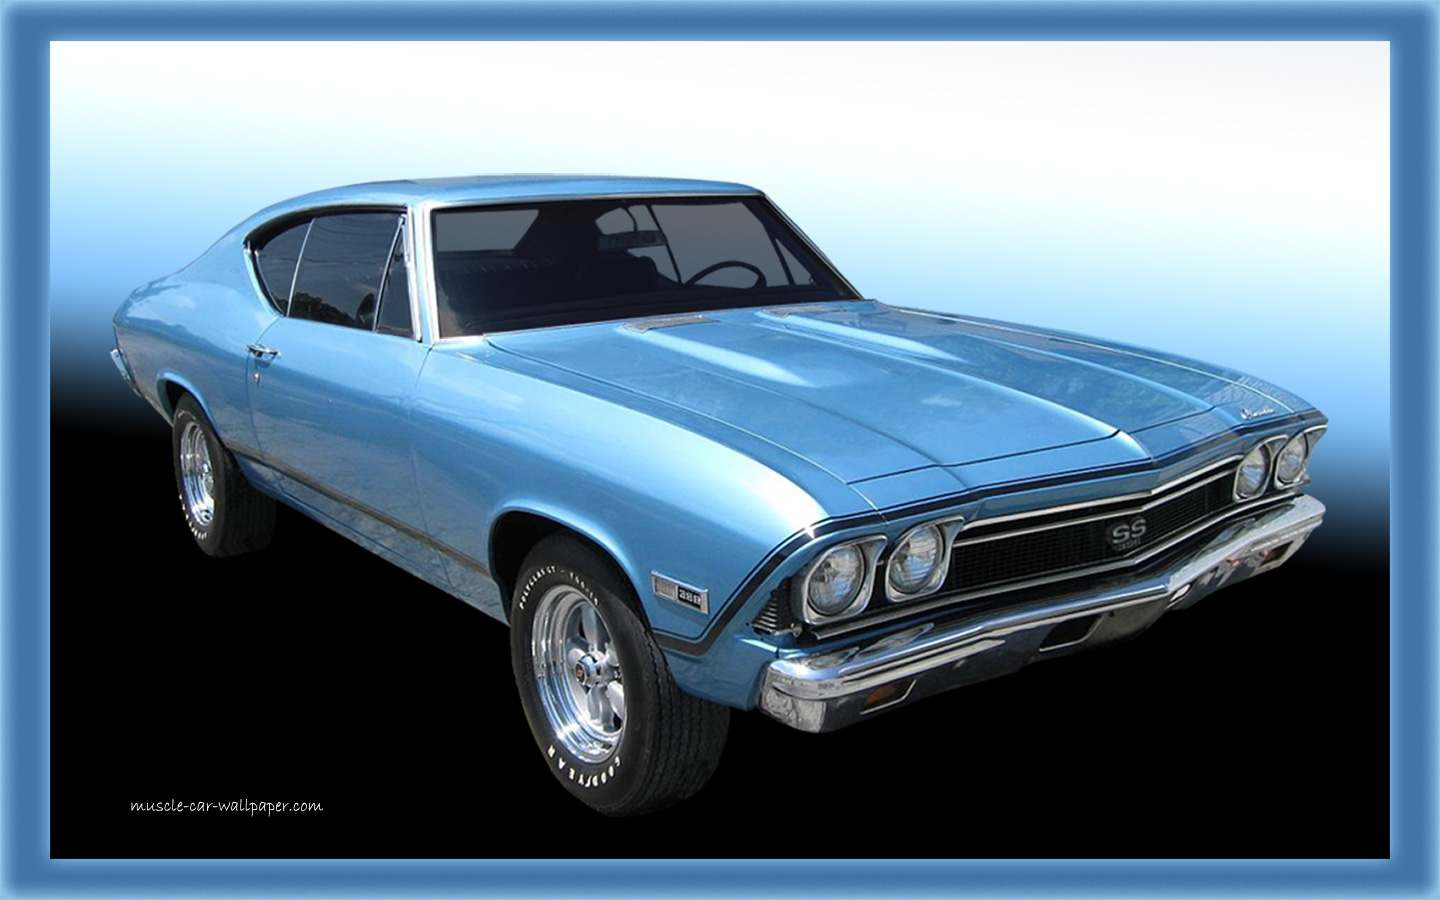 1968 Chevelle SS Wallpaper   Blue Coupe   Right Front View 1440x900